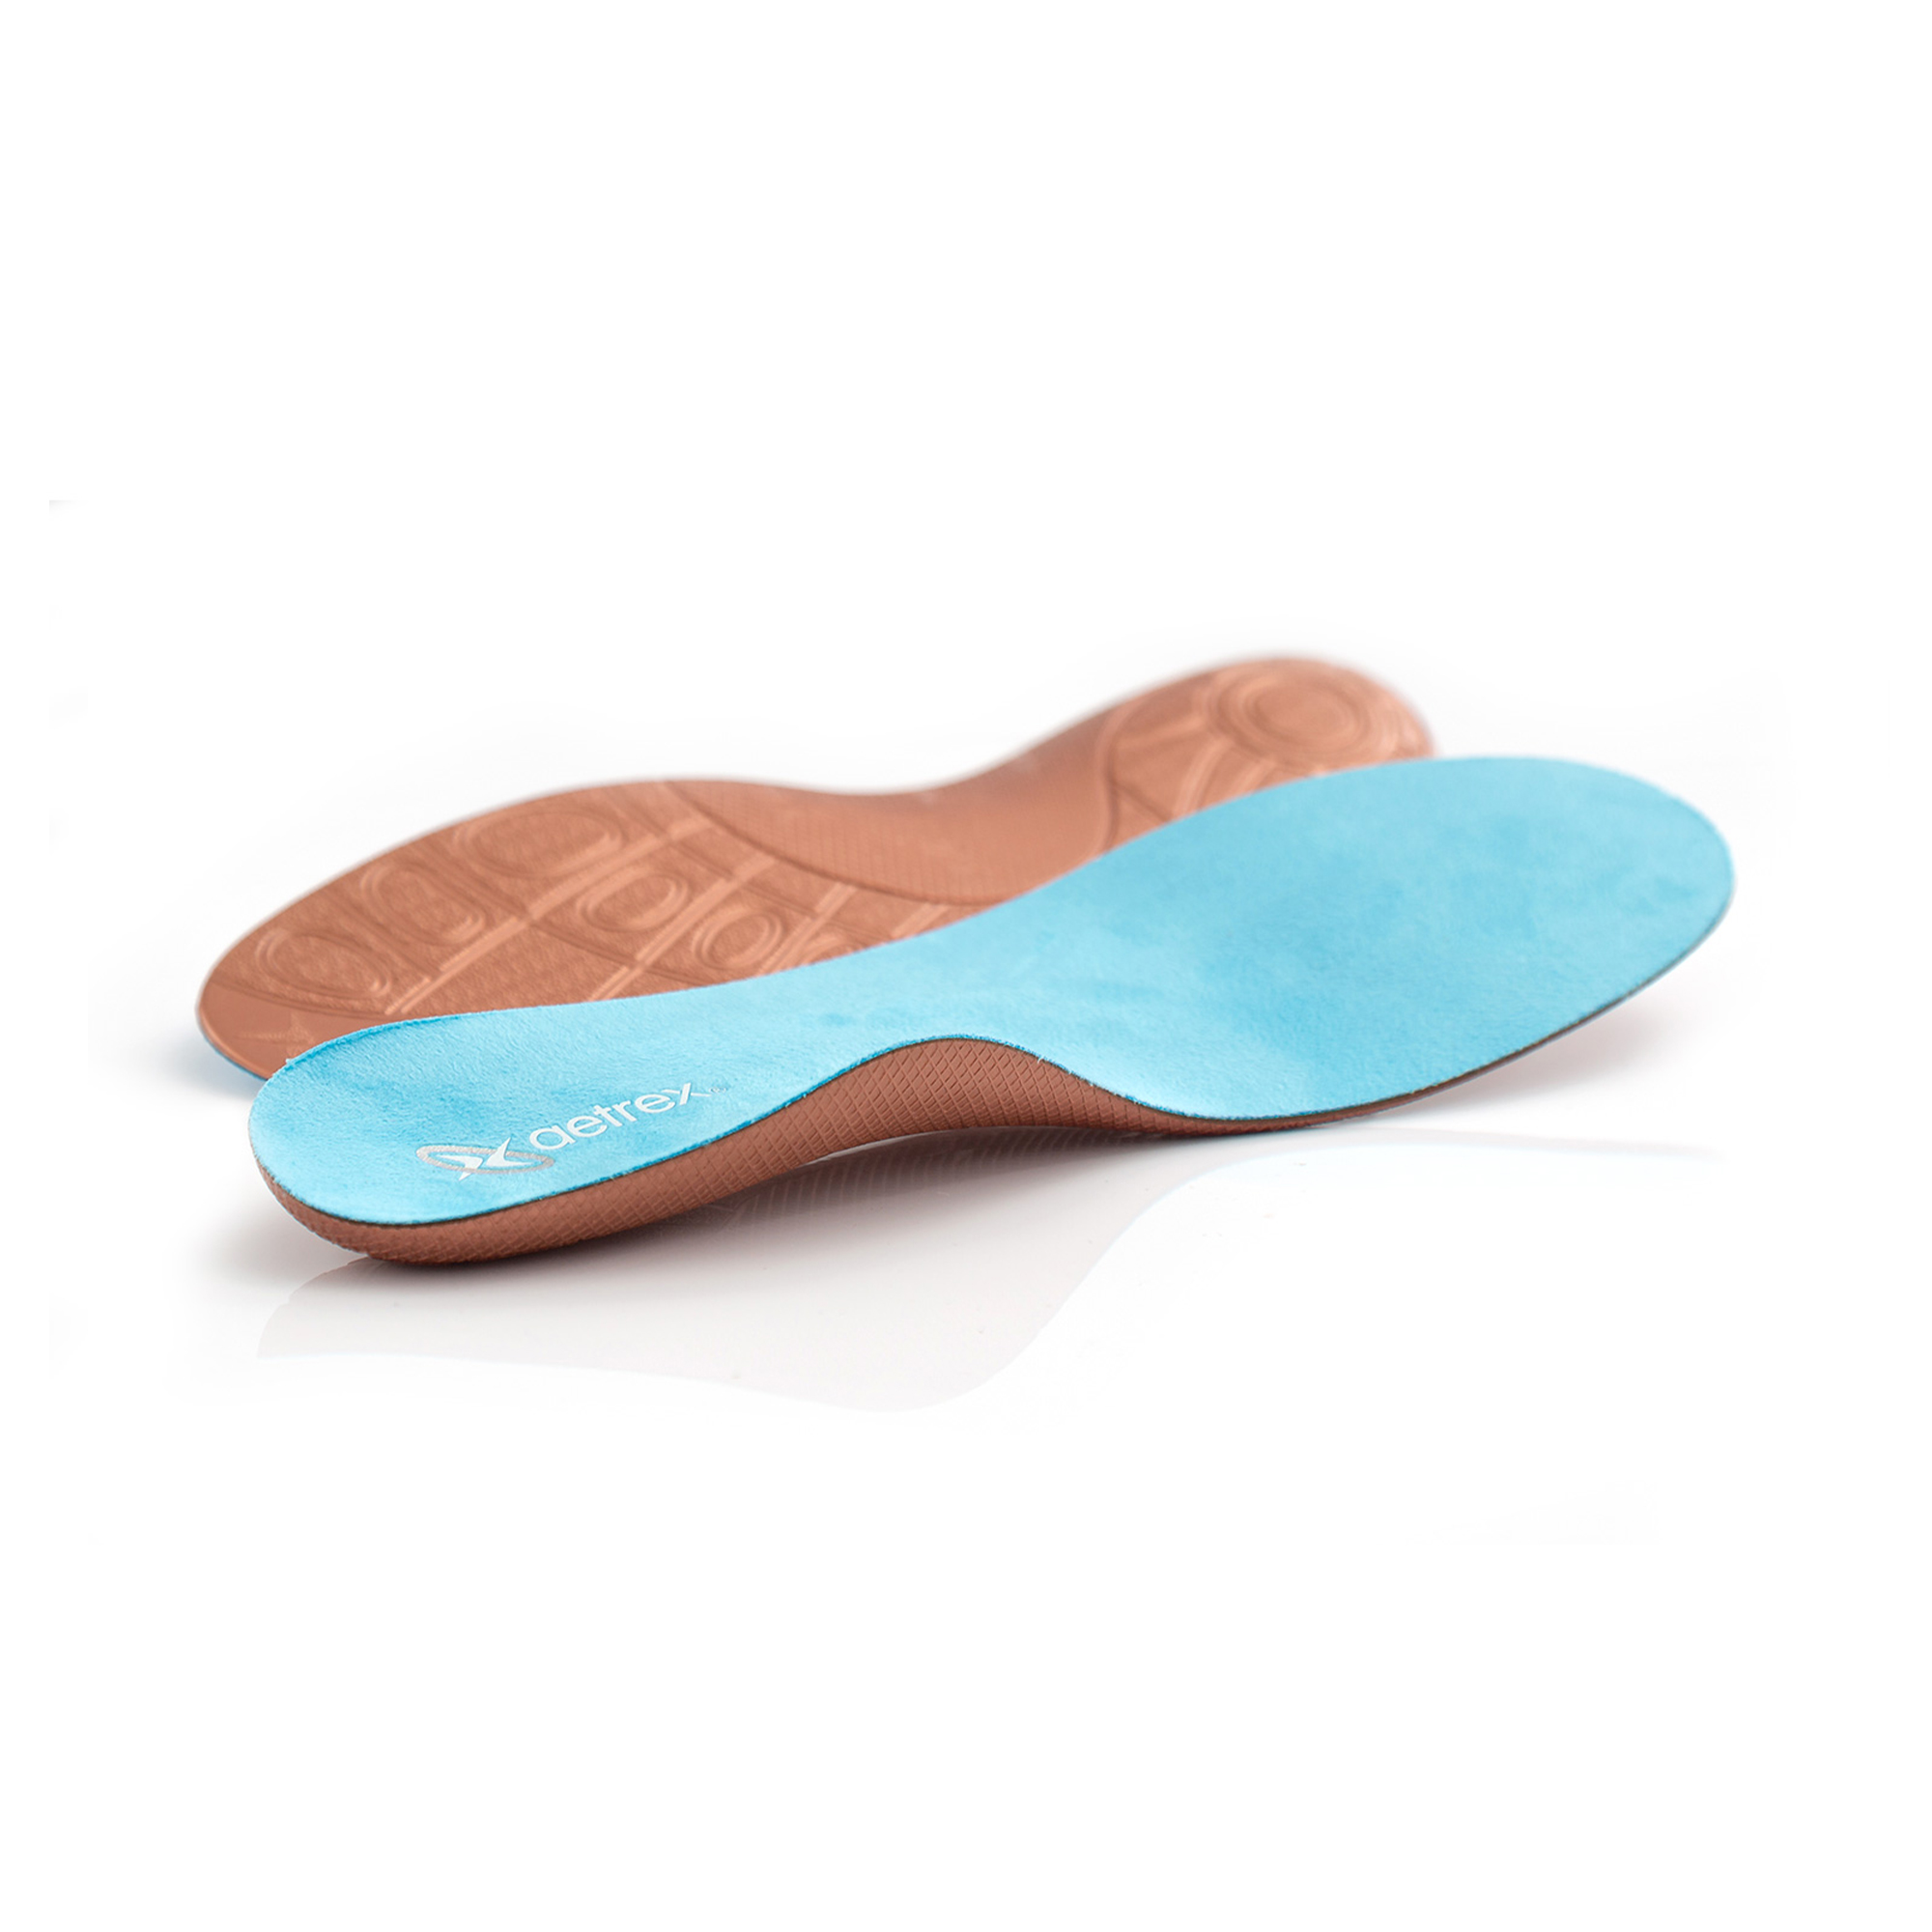 boots with removable insoles for orthotics